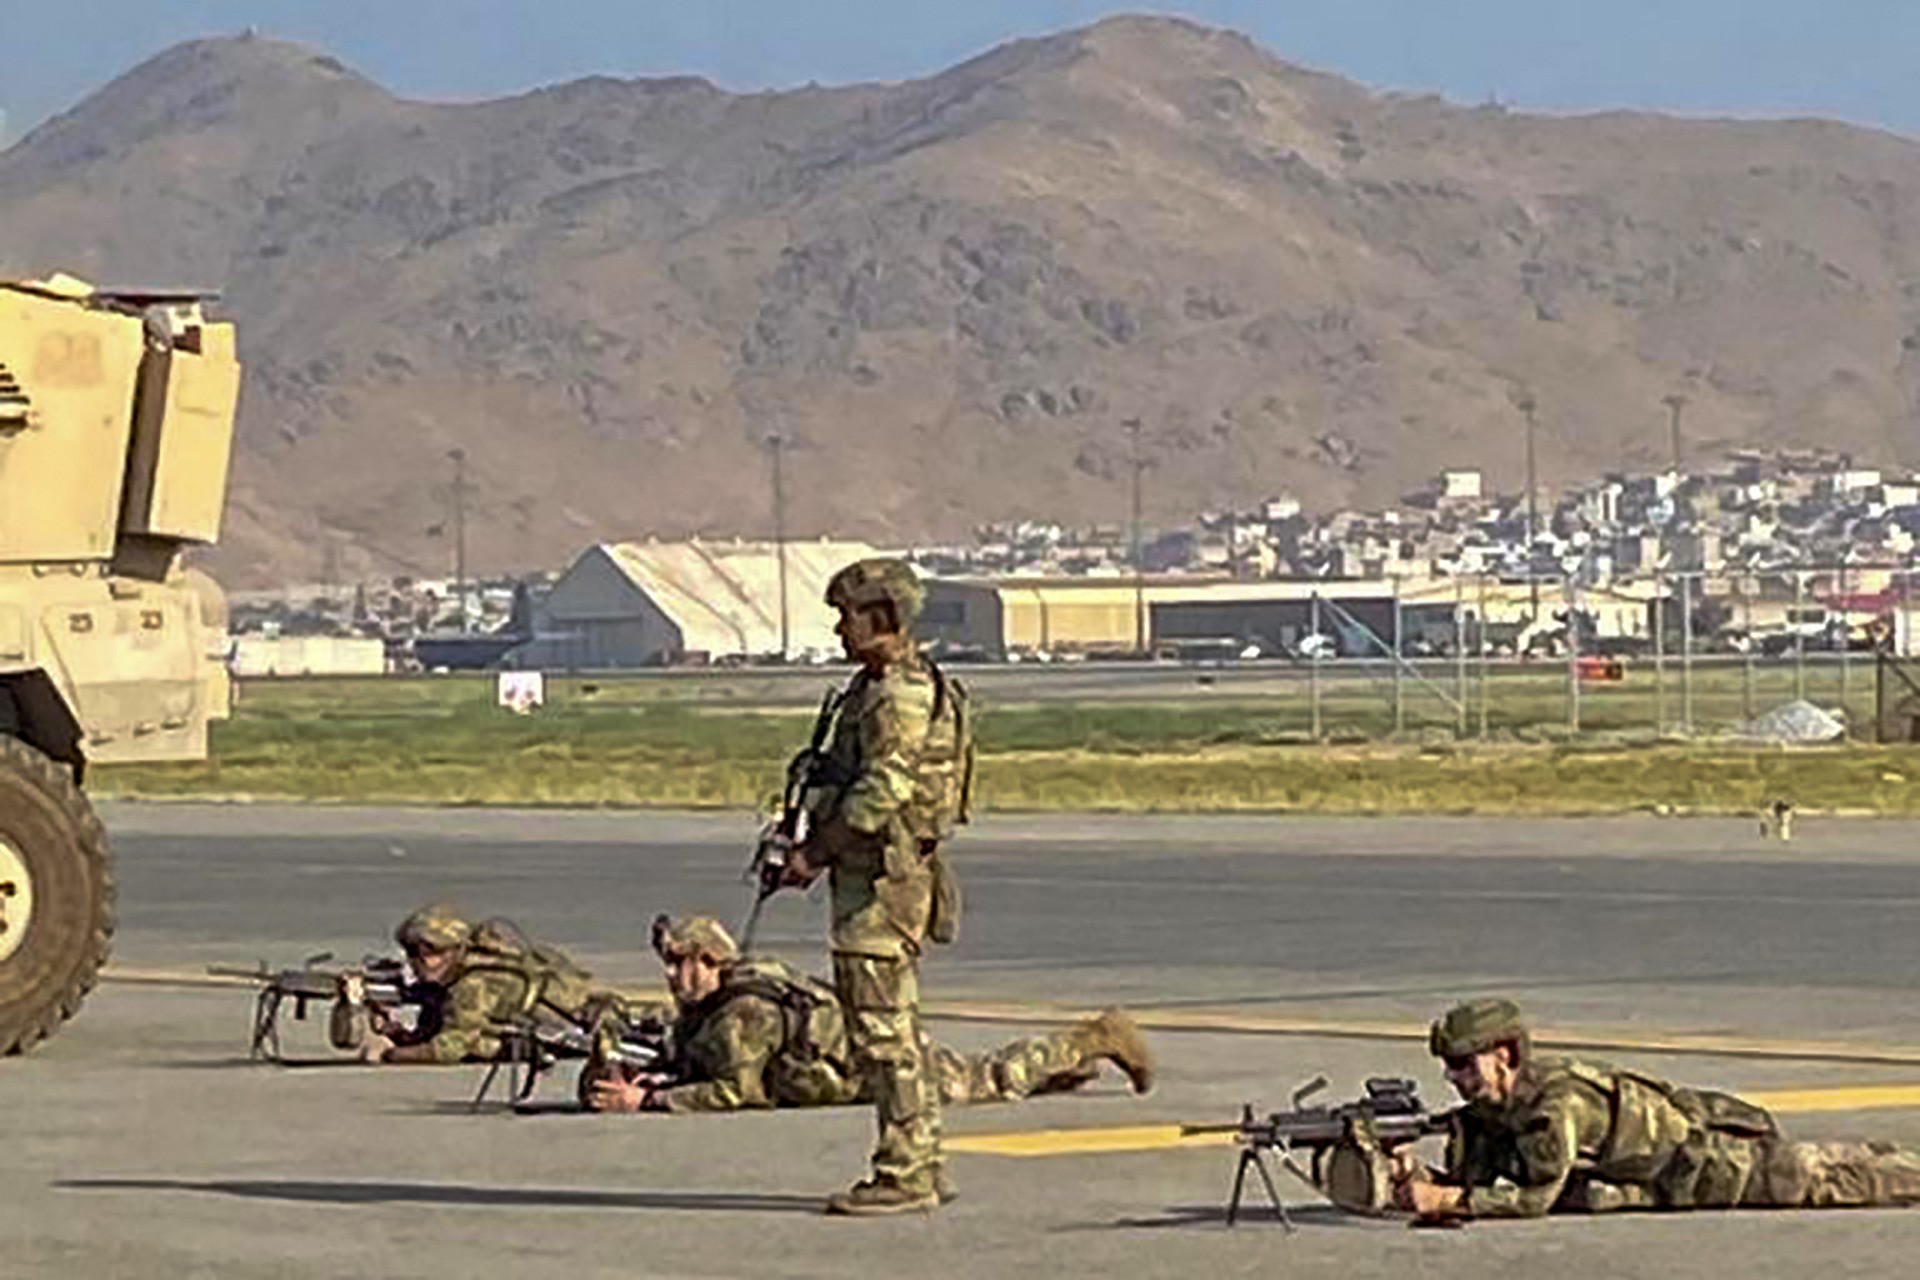 US soldiers take up their positions as they secure the airport in Kabul on August 16, 2021, after a stunningly swift end to Afghanistan's 20-year war, as thousands of people mobbed the city's airport trying to flee the group's feared hardline brand of Islamist rule. (Photo by SHAKIB RAHMANI / AFP) (Photo by SHAKIB RAHMANI/AFP via Getty Images)